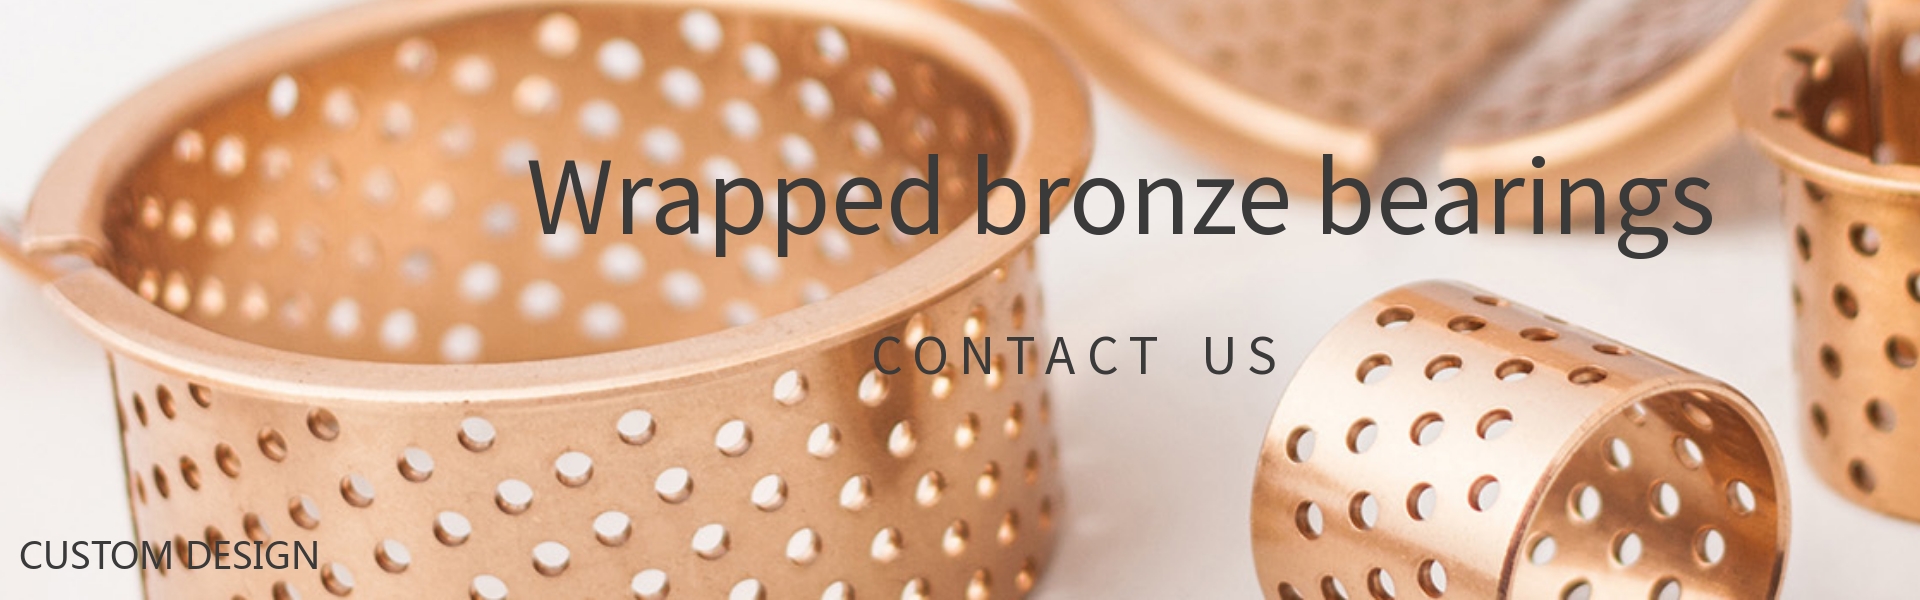 wrapped bronze bearings, Wrapped bronze plain bearings, Wrapped bronze flanged bearings, Wrapped bronze perforated bearings , CuSn8 Bronze Bearings (B09) 